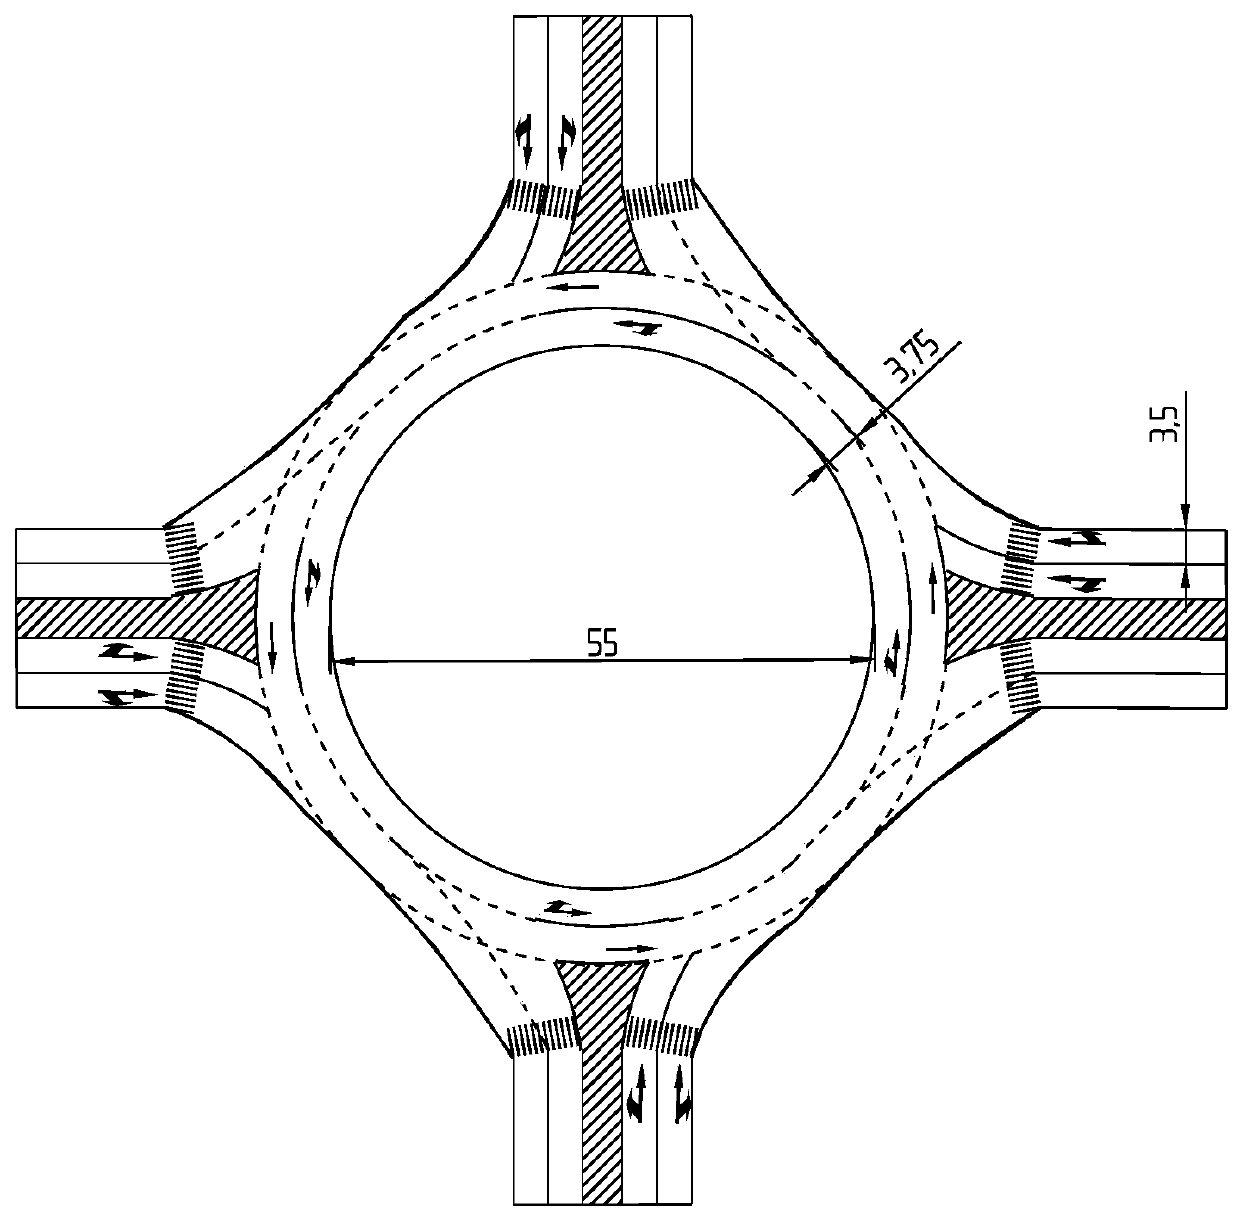 Modeling and Analysis Method of Roundabout Traffic Capacity